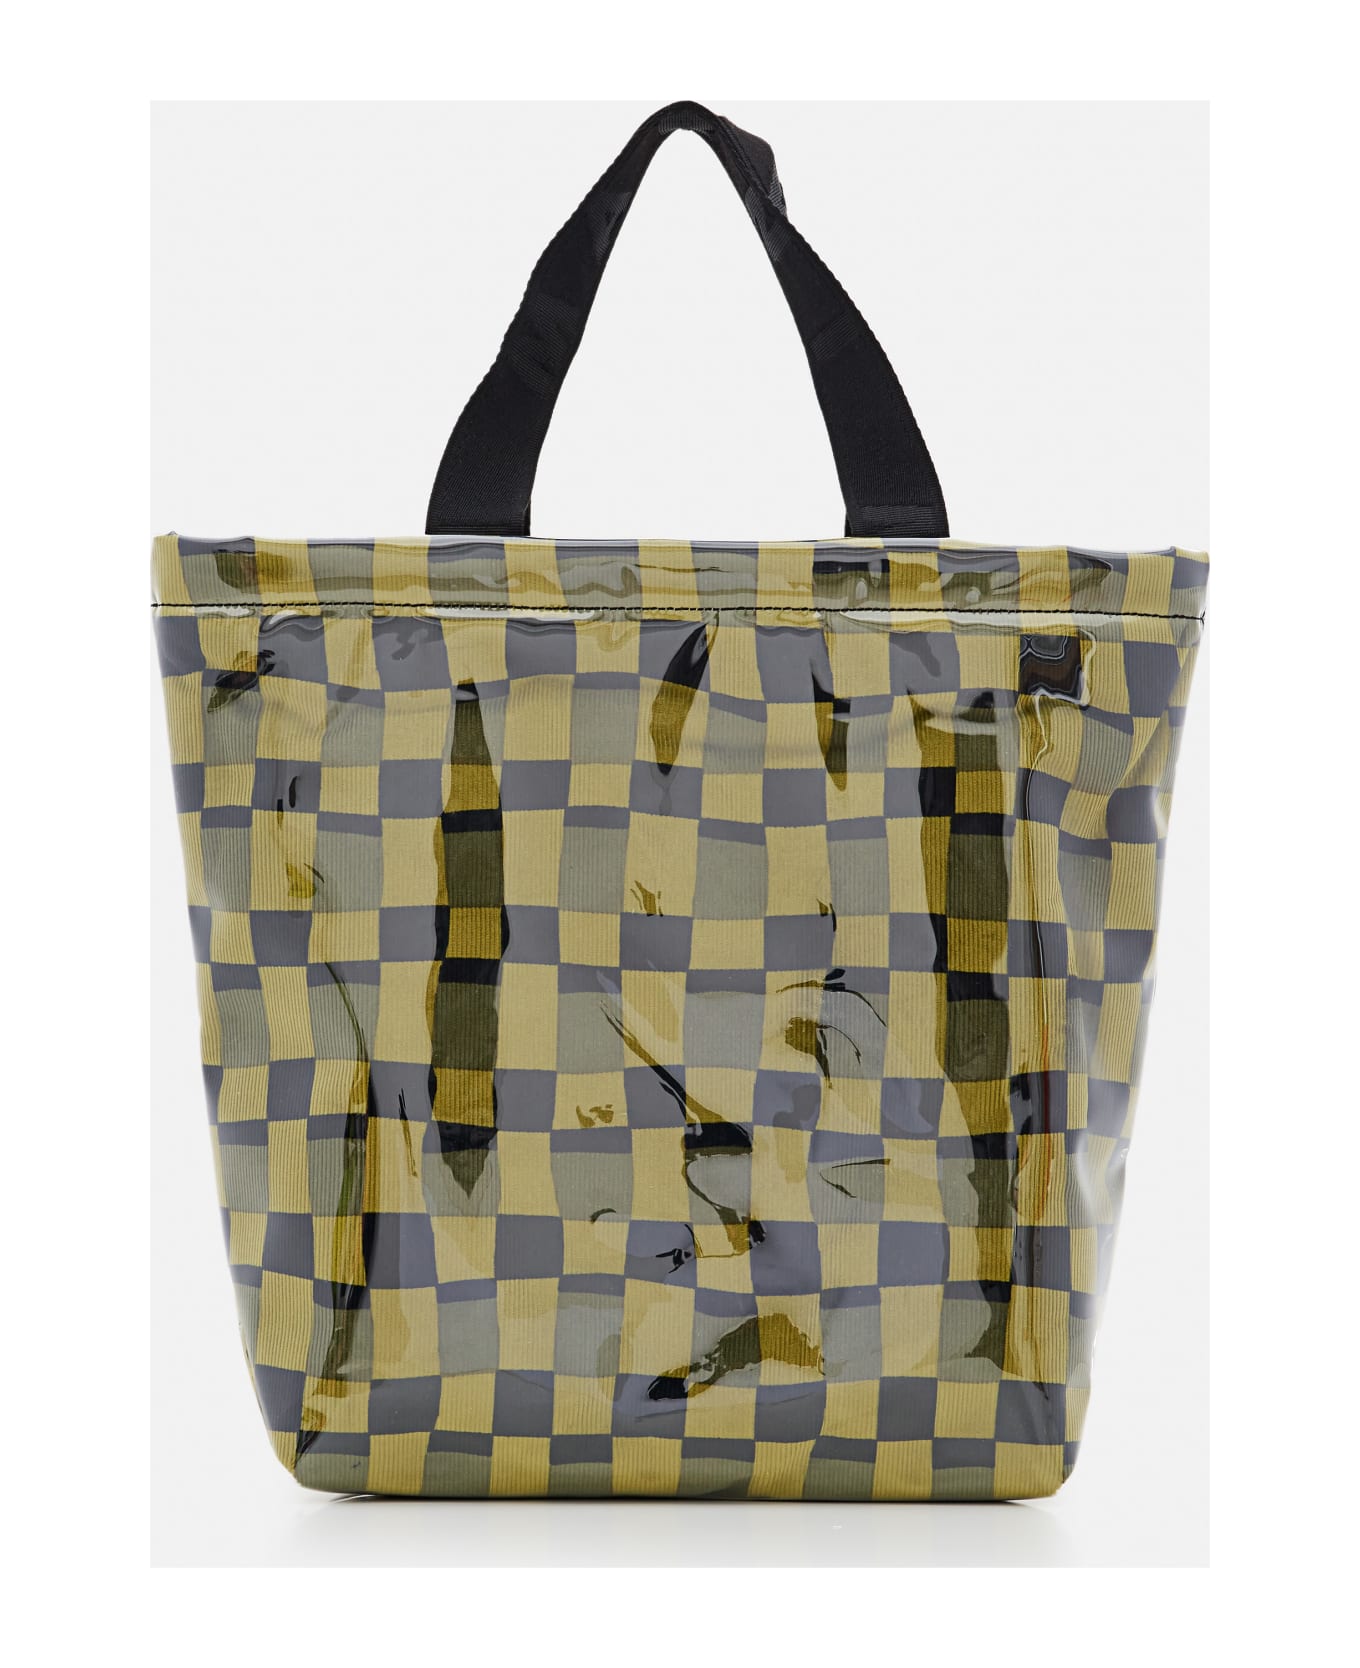 Marni Upcycling Tote - MultiColour トートバッグ